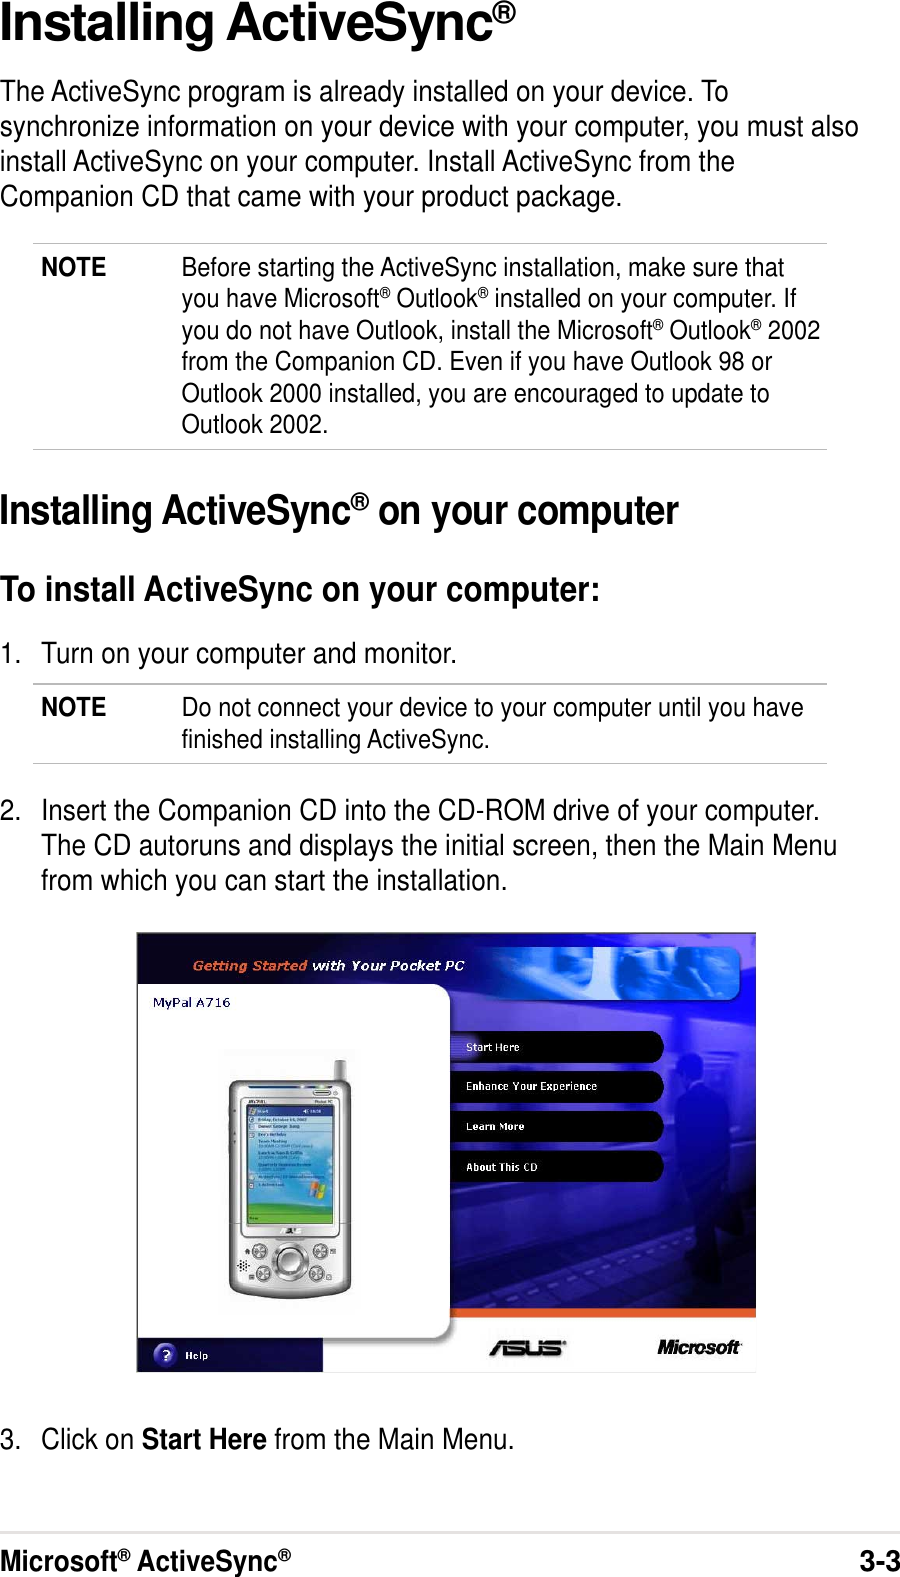 Microsoft® ActiveSync®3-3Installing ActiveSync®The ActiveSync program is already installed on your device. Tosynchronize information on your device with your computer, you must alsoinstall ActiveSync on your computer. Install ActiveSync from theCompanion CD that came with your product package.NOTE Before starting the ActiveSync installation, make sure thatyou have Microsoft® Outlook® installed on your computer. Ifyou do not have Outlook, install the Microsoft® Outlook® 2002from the Companion CD. Even if you have Outlook 98 orOutlook 2000 installed, you are encouraged to update toOutlook 2002.Installing ActiveSync® on your computerTo install ActiveSync on your computer:1. Turn on your computer and monitor.NOTE Do not connect your device to your computer until you havefinished installing ActiveSync.2. Insert the Companion CD into the CD-ROM drive of your computer.The CD autoruns and displays the initial screen, then the Main Menufrom which you can start the installation.3. Click on Start Here from the Main Menu.